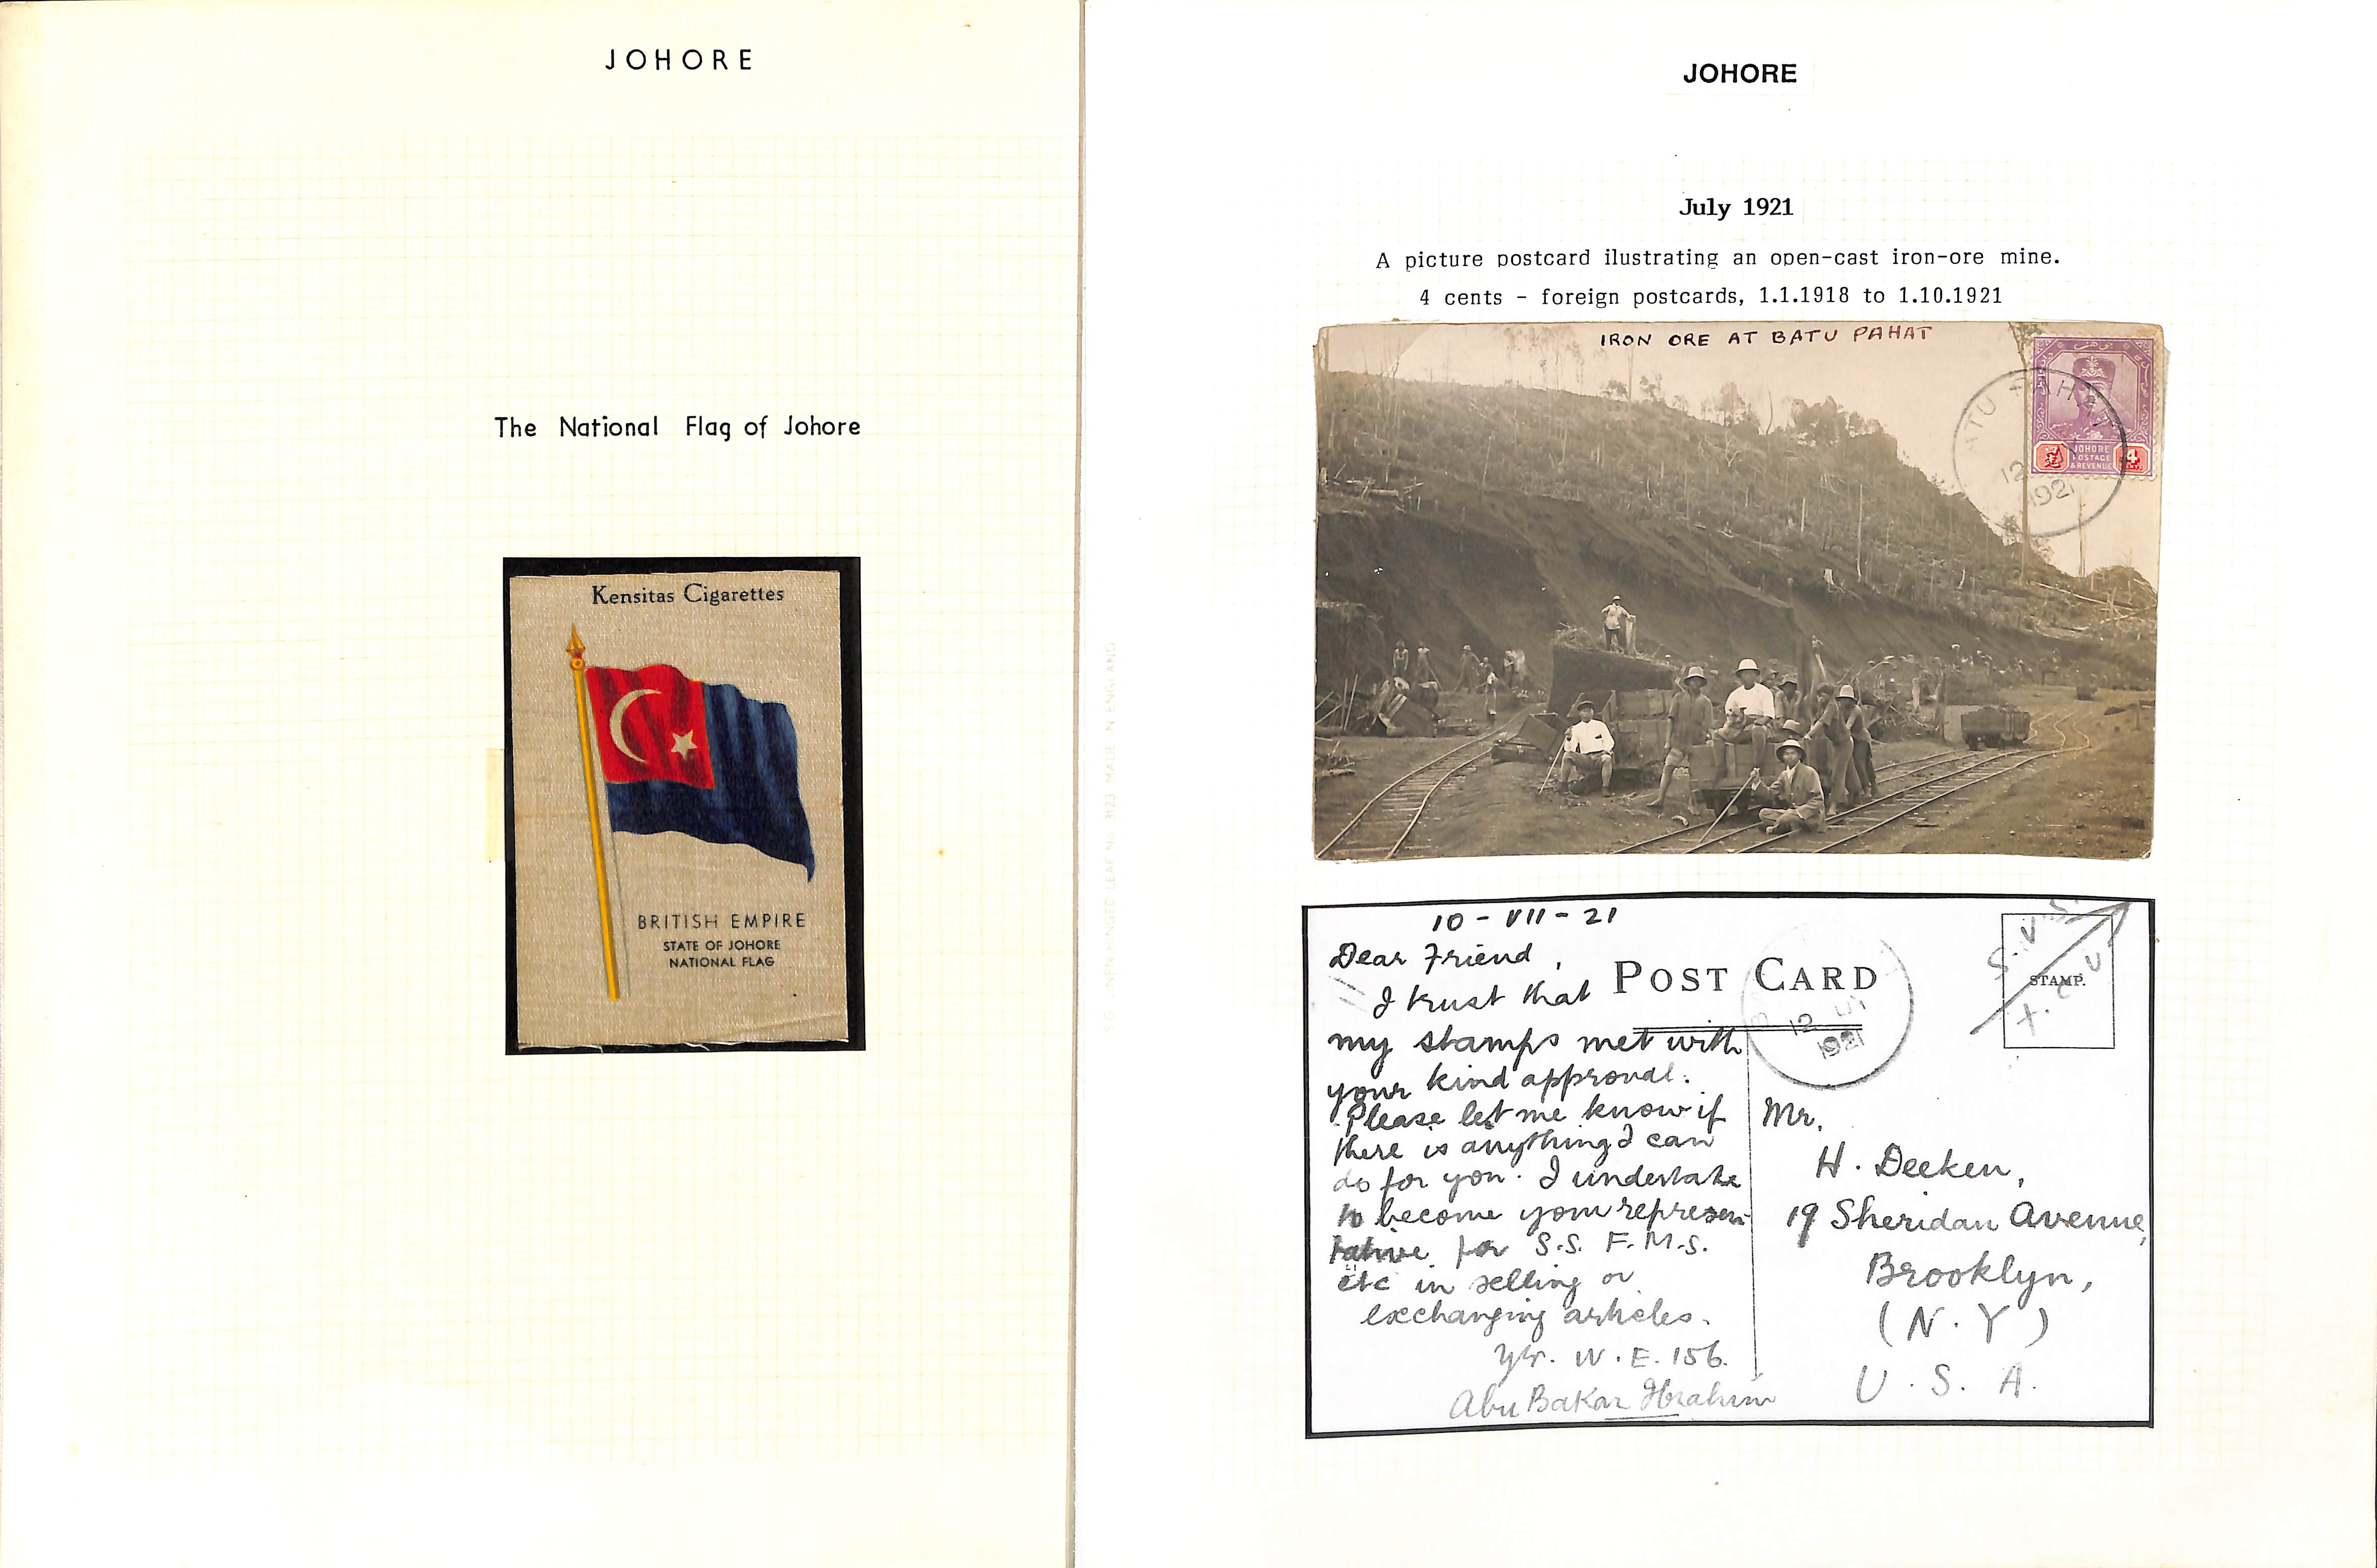 Johore. 1908-64 Covers, cards and ephemera including 1913 Red Band envelope from Kota Tinggi to - Image 2 of 7